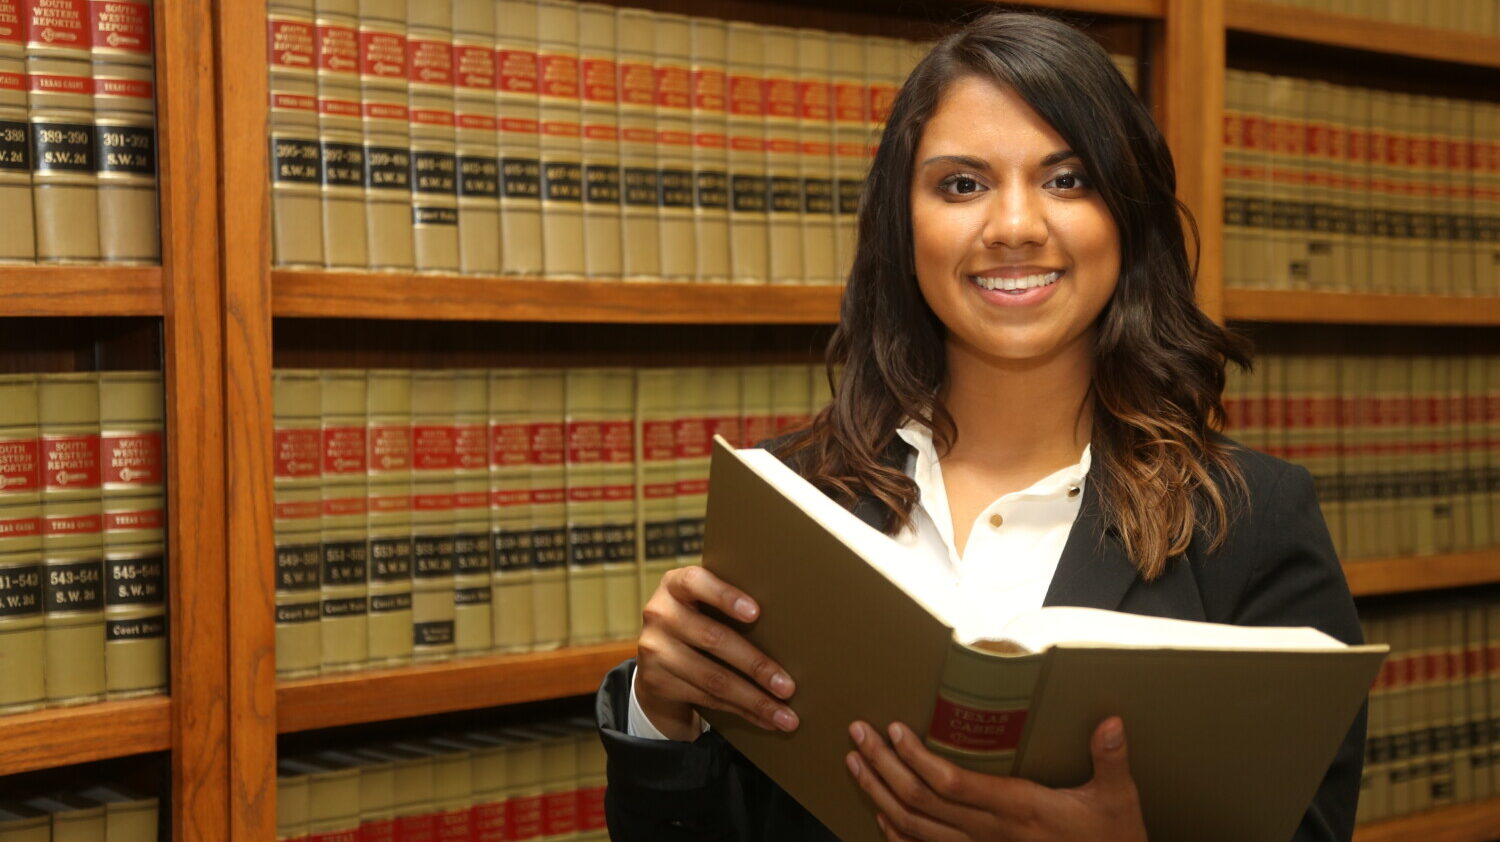 Paralegal holds law book